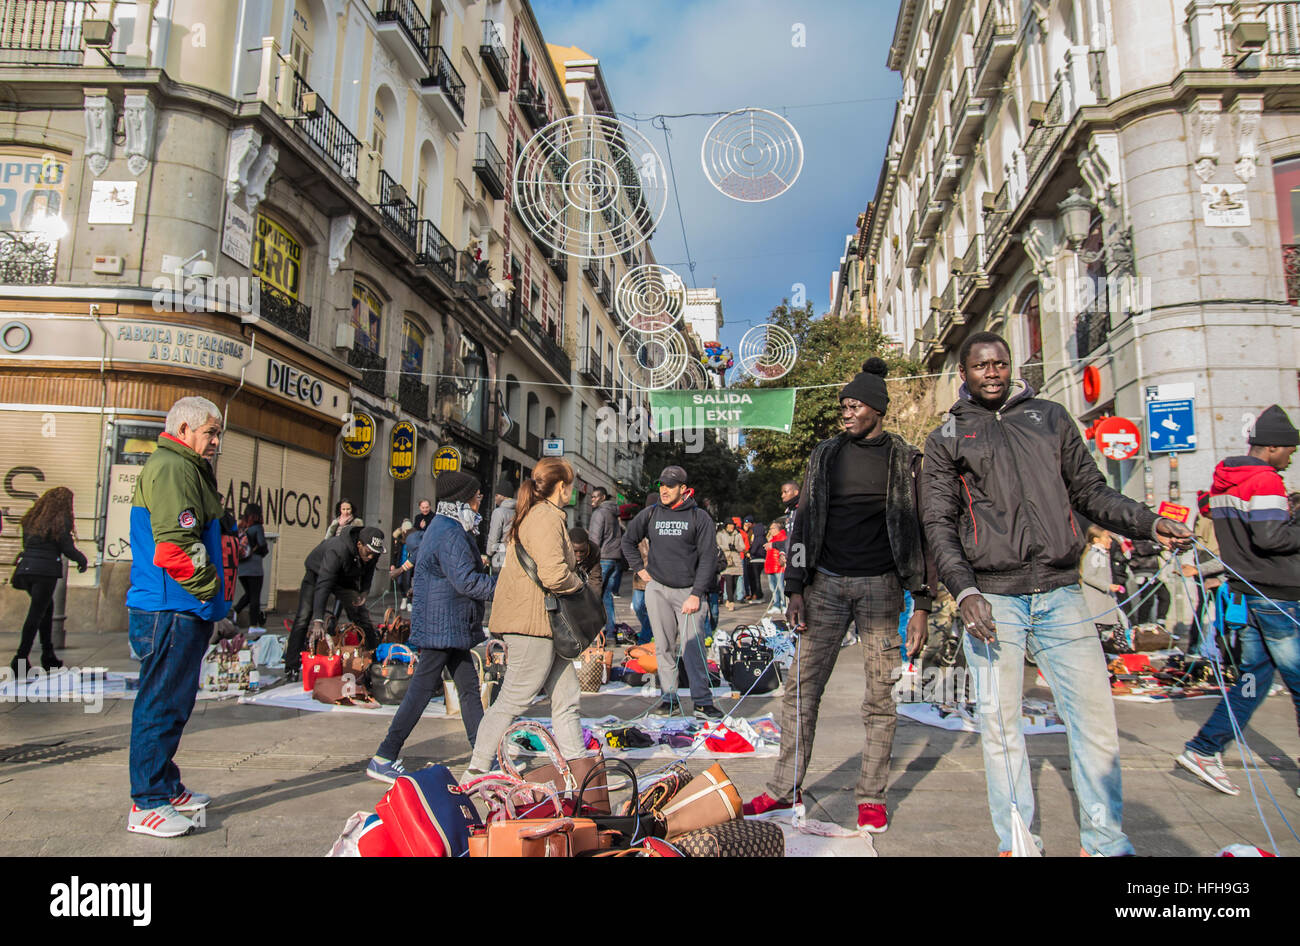 Madrid, Spain. 1st January 2017. First day of 2017 on the streets in Madrid, Spain. in the picture people in the street montera and square sol selling shoes, bags, and perfume. Credit: Alberto Sibaja Ramírez/Alamy Live News Stock Photo